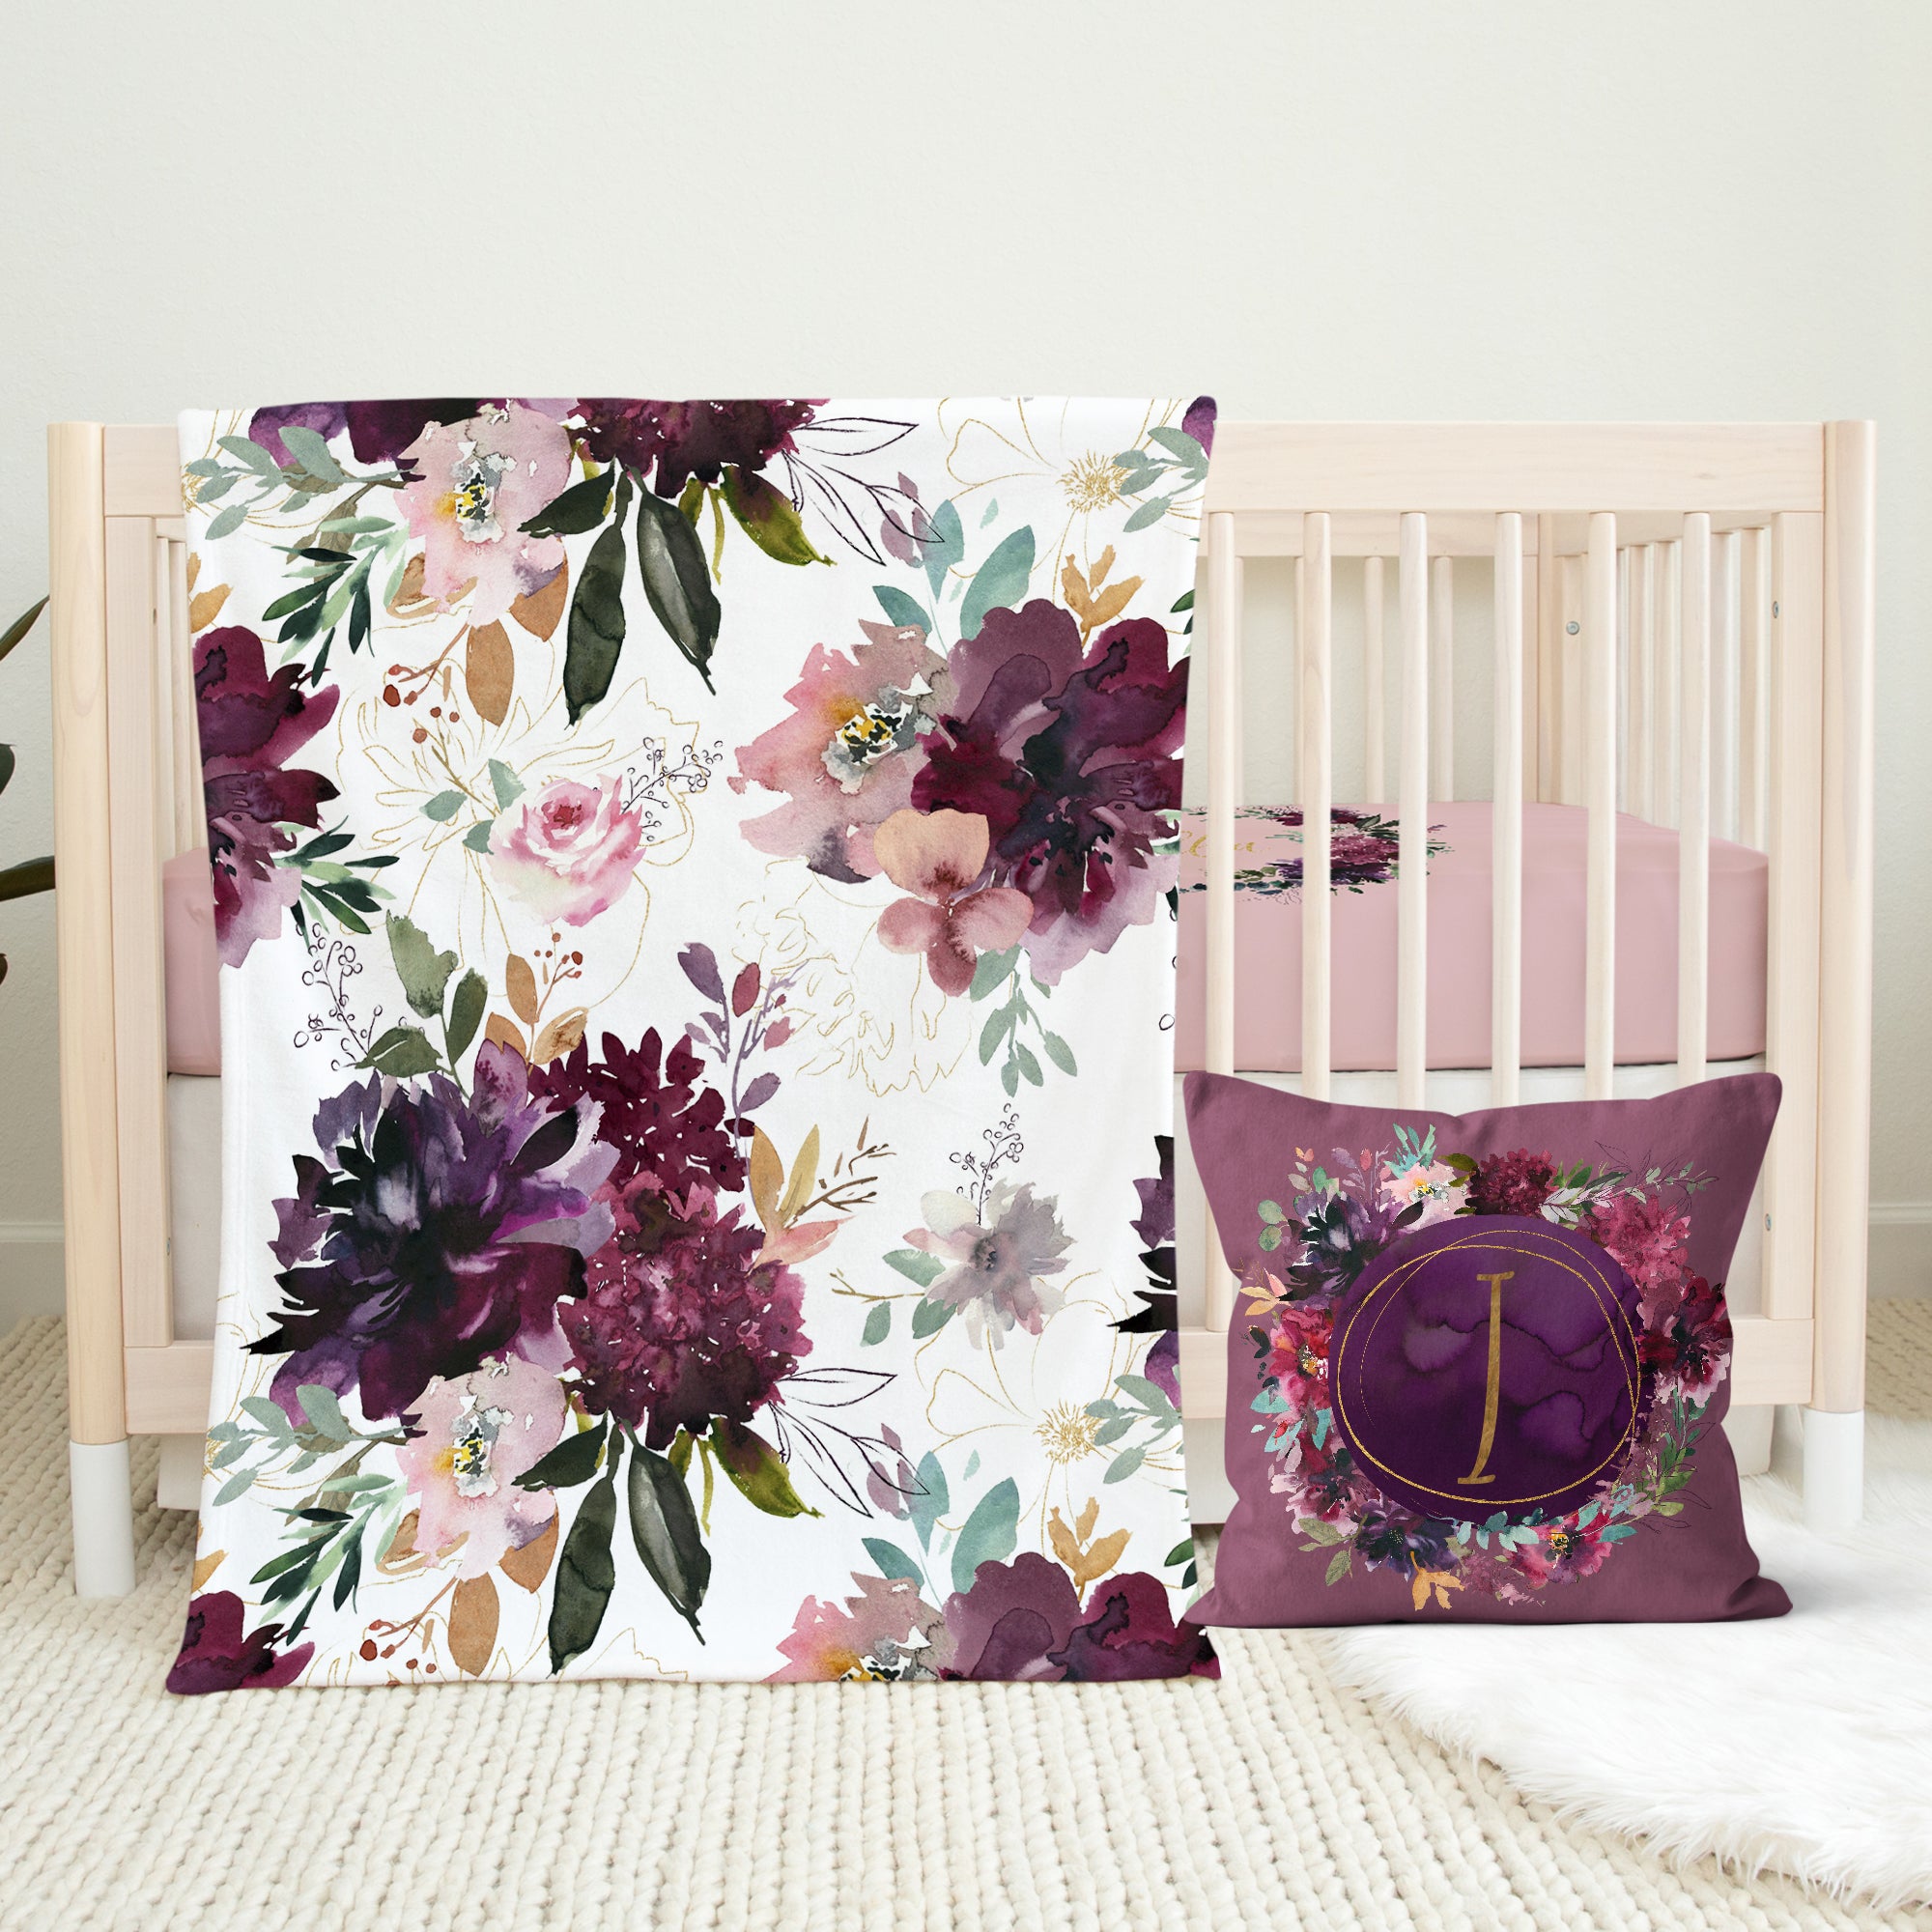 Whisper Floral Minky Blanket - gender_girl, Personalized_No, Theme_Floral